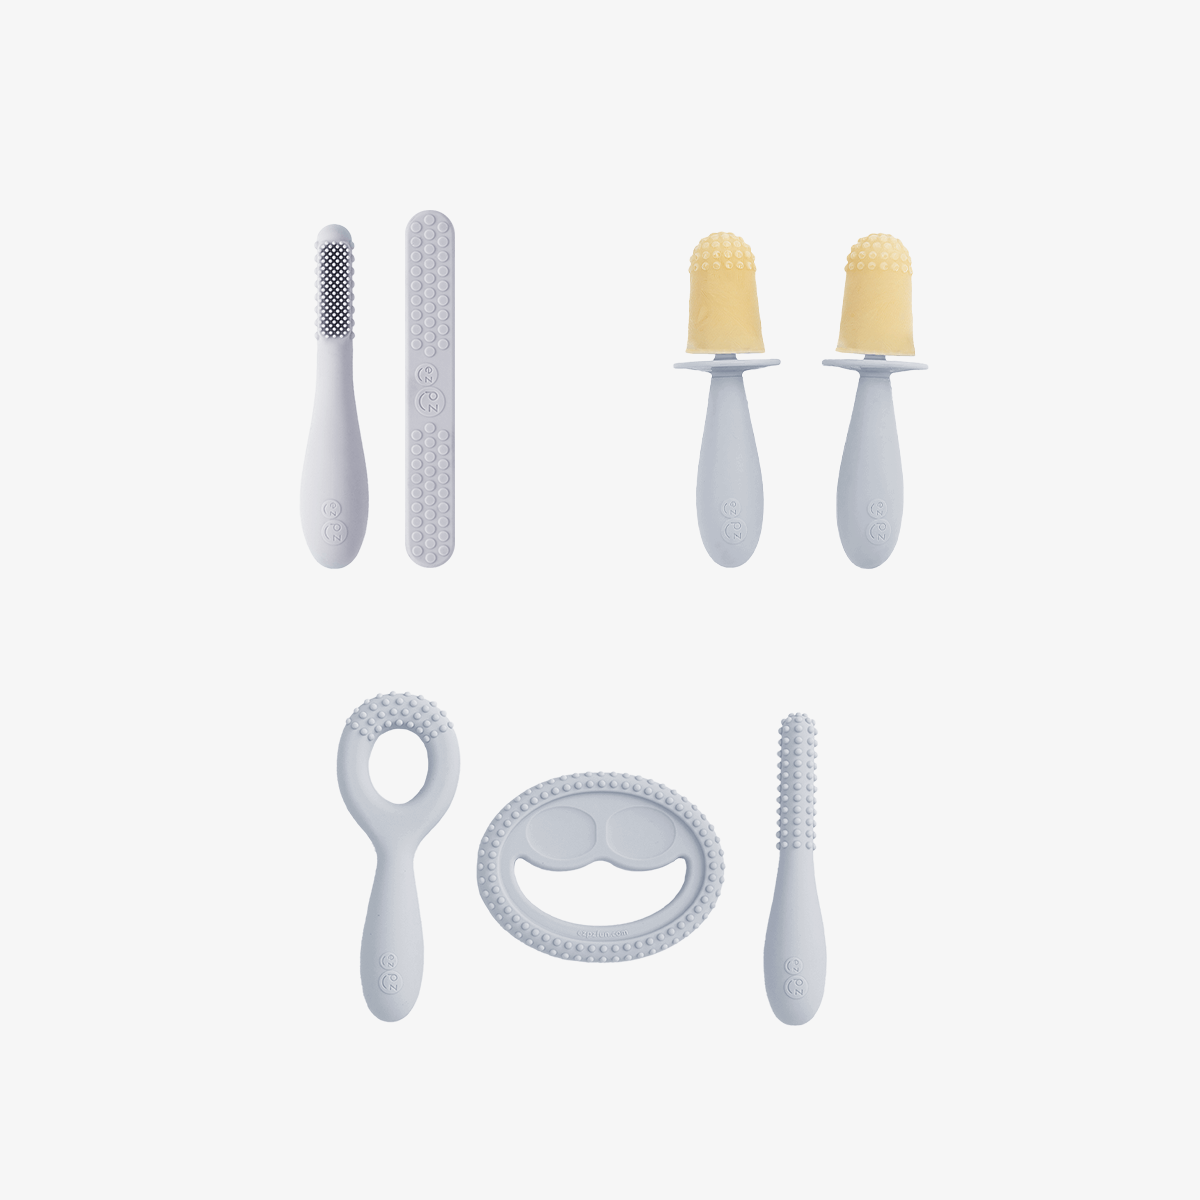 Pre-Feeding Oral Care Bundle in Pewter Light Gray / ezpz Baby-Led™ Toothbrush + Sensory Tongue Depressor Dual Pack, Tiny Pops and Oral Development Tools